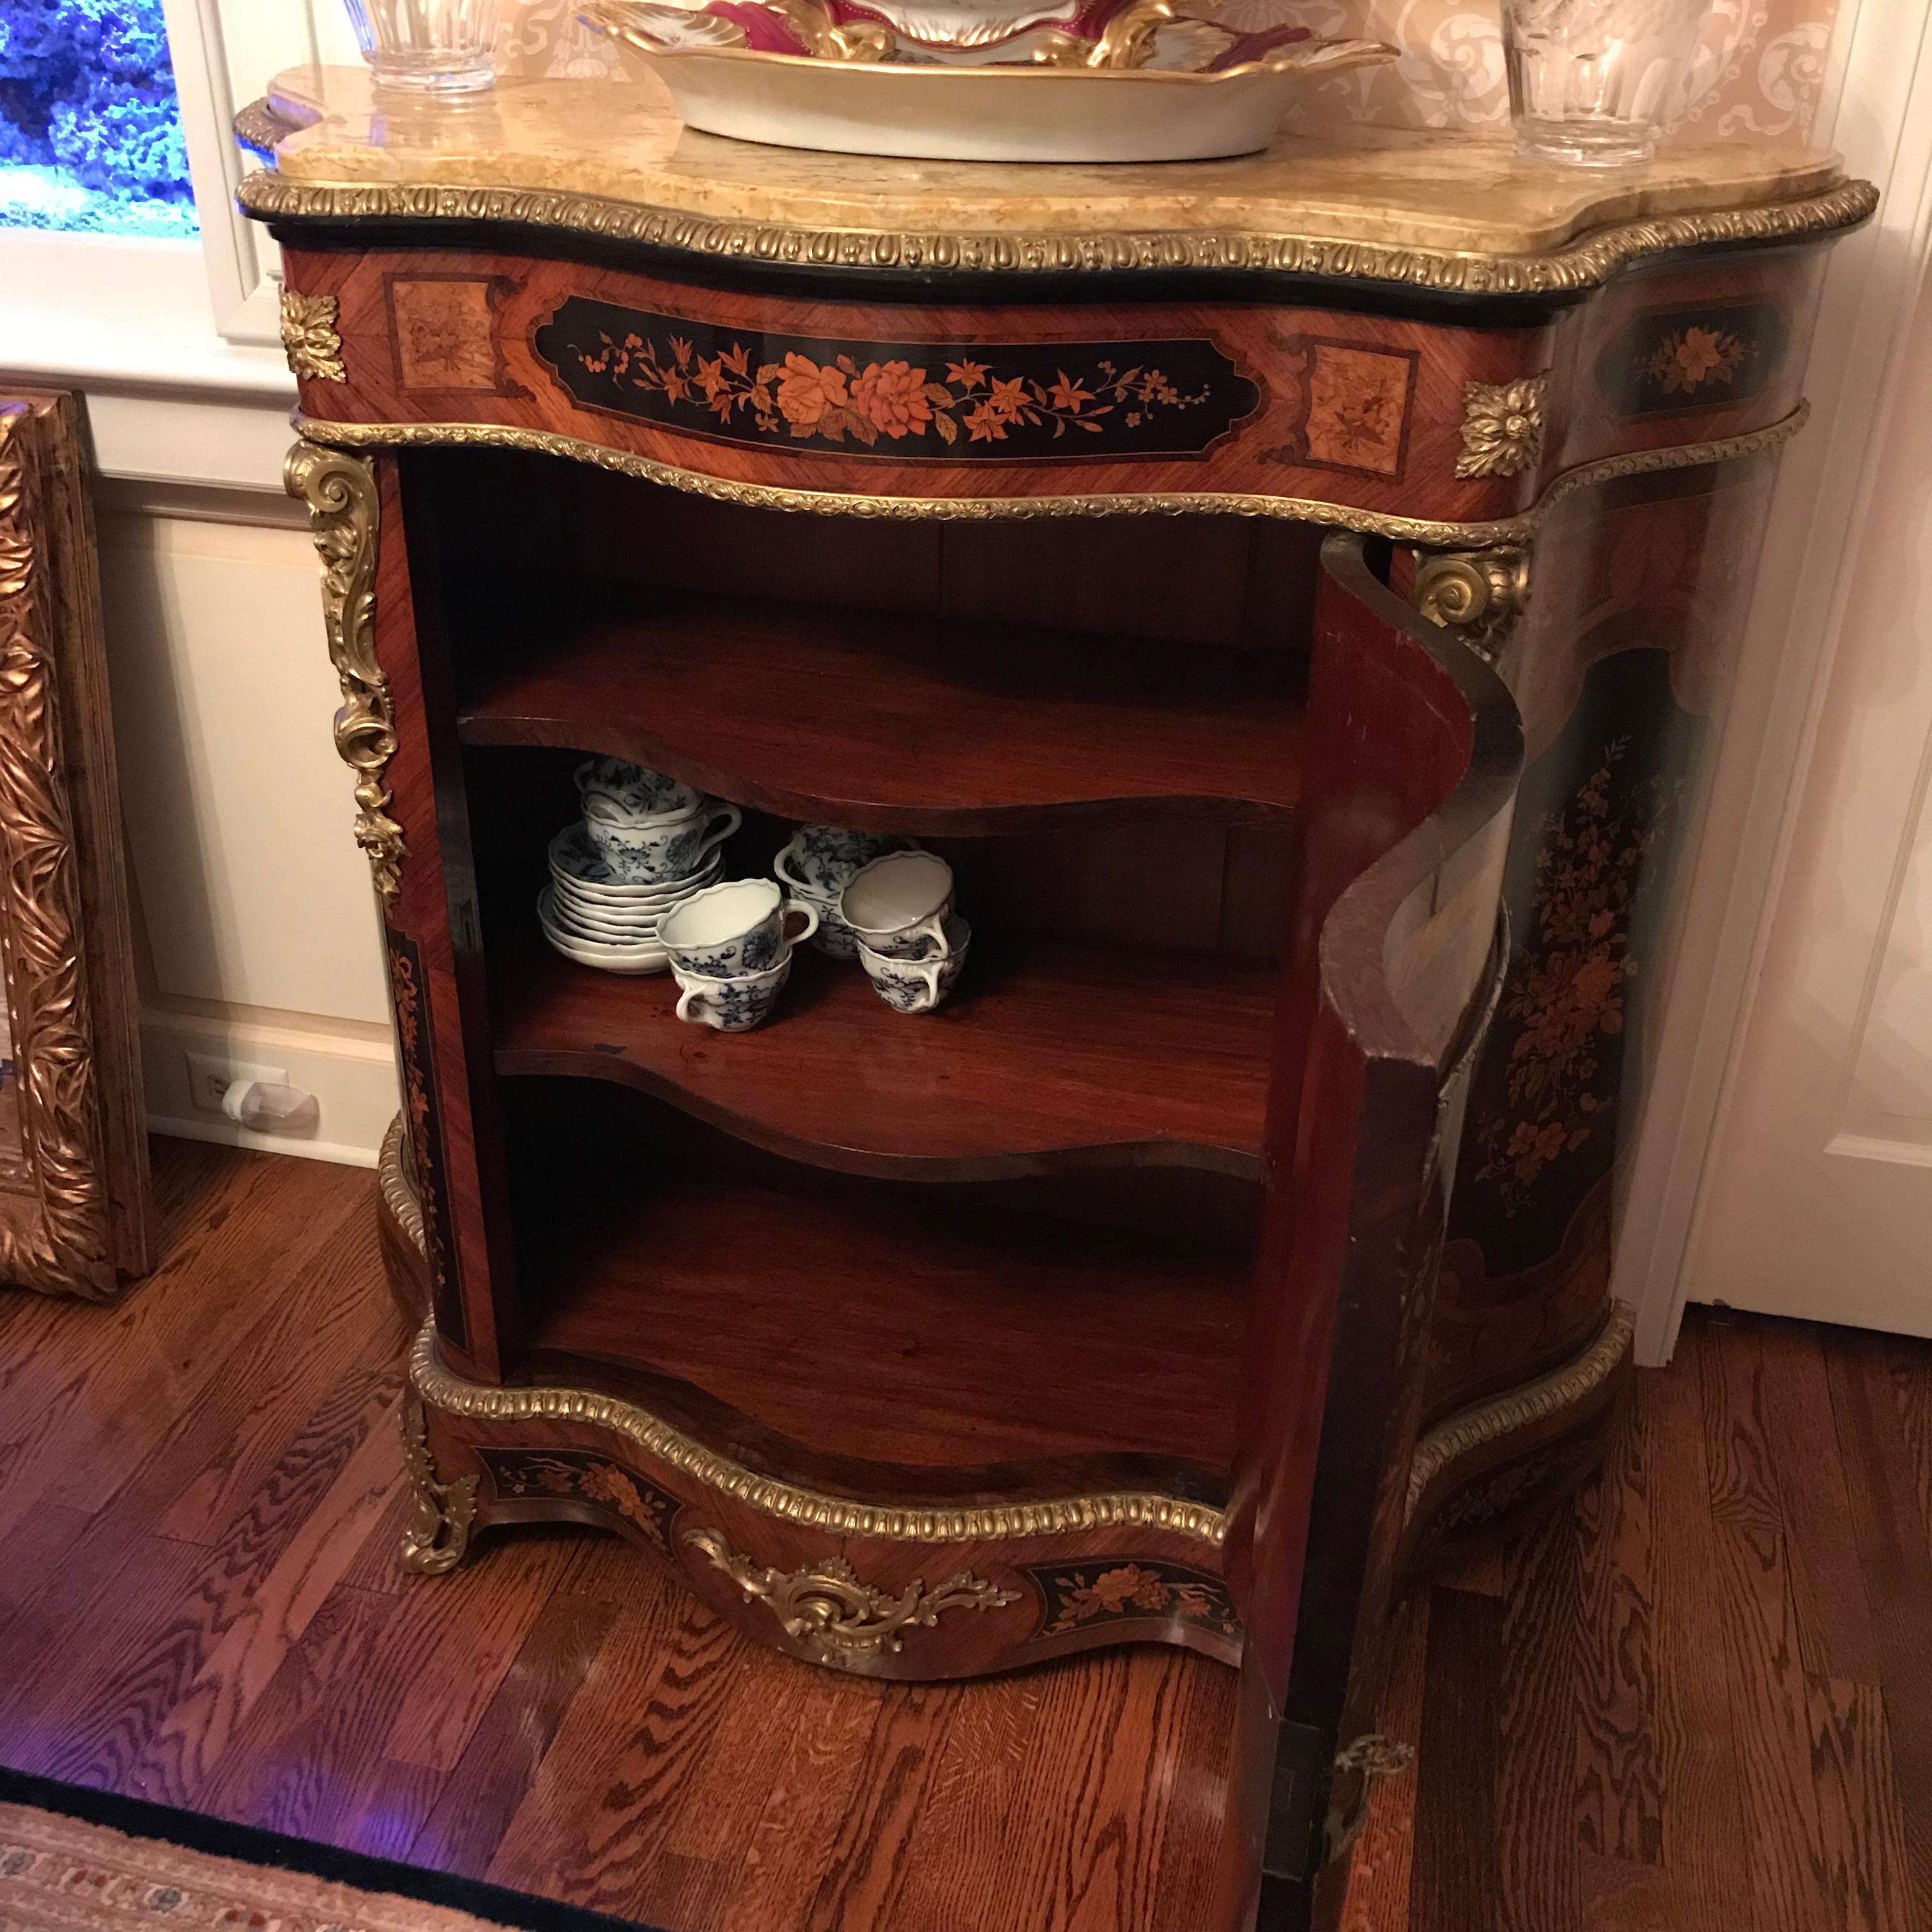 19th Century French Kingwood Salon Cabinet In Excellent Condition For Sale In Washington Crossing, PA